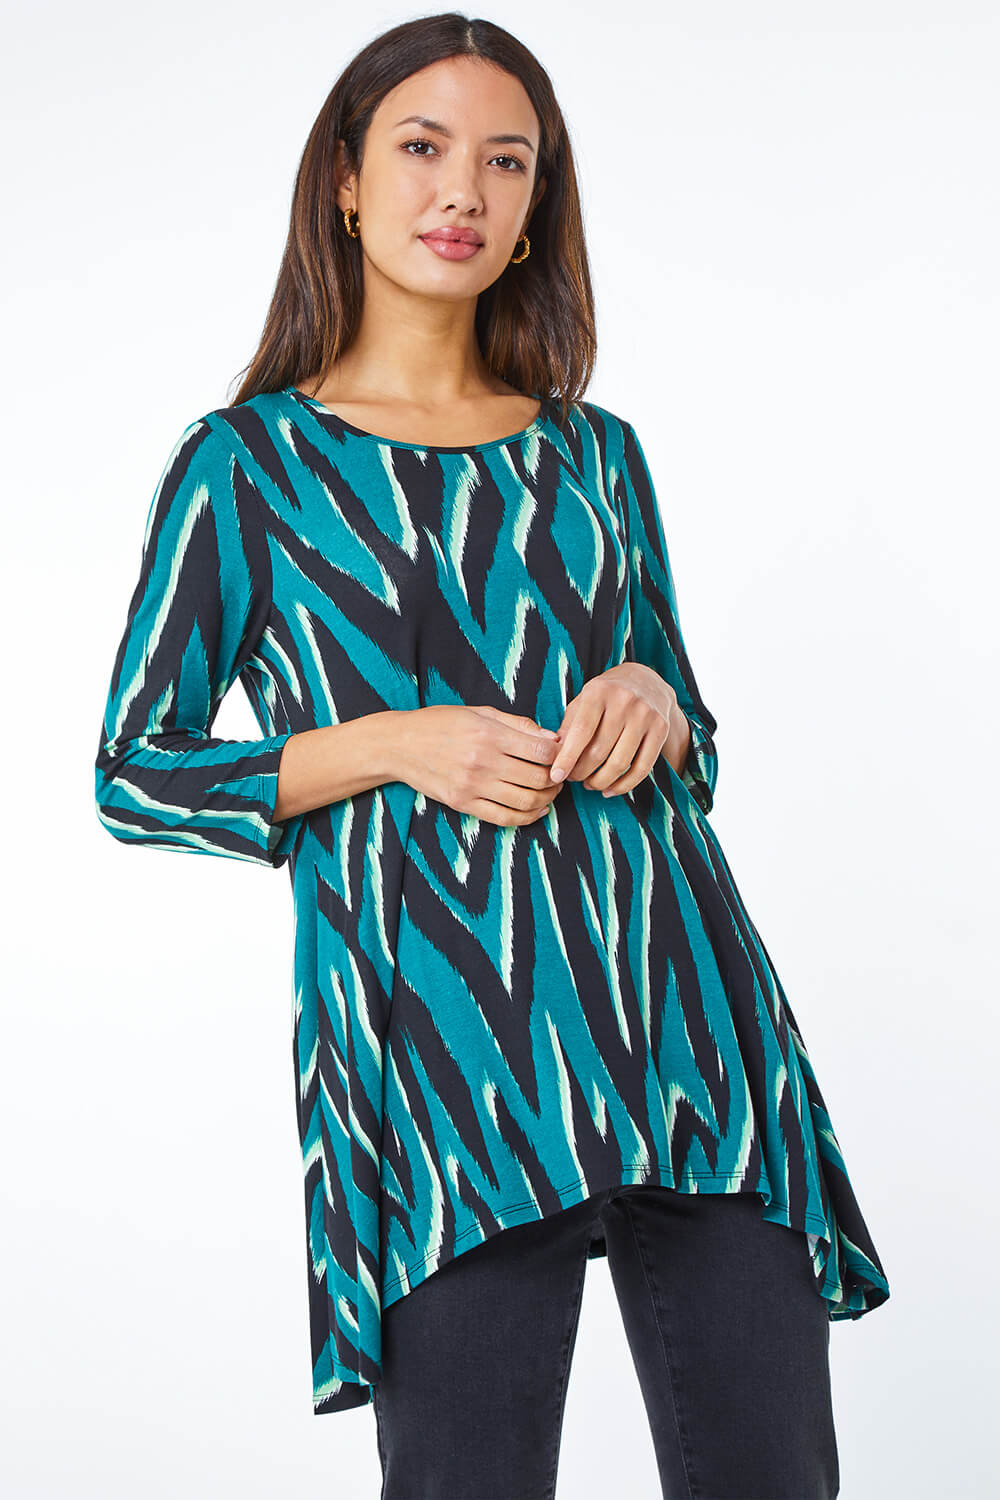 Green Animal Swing Stretch Tunic Top, Image 2 of 5